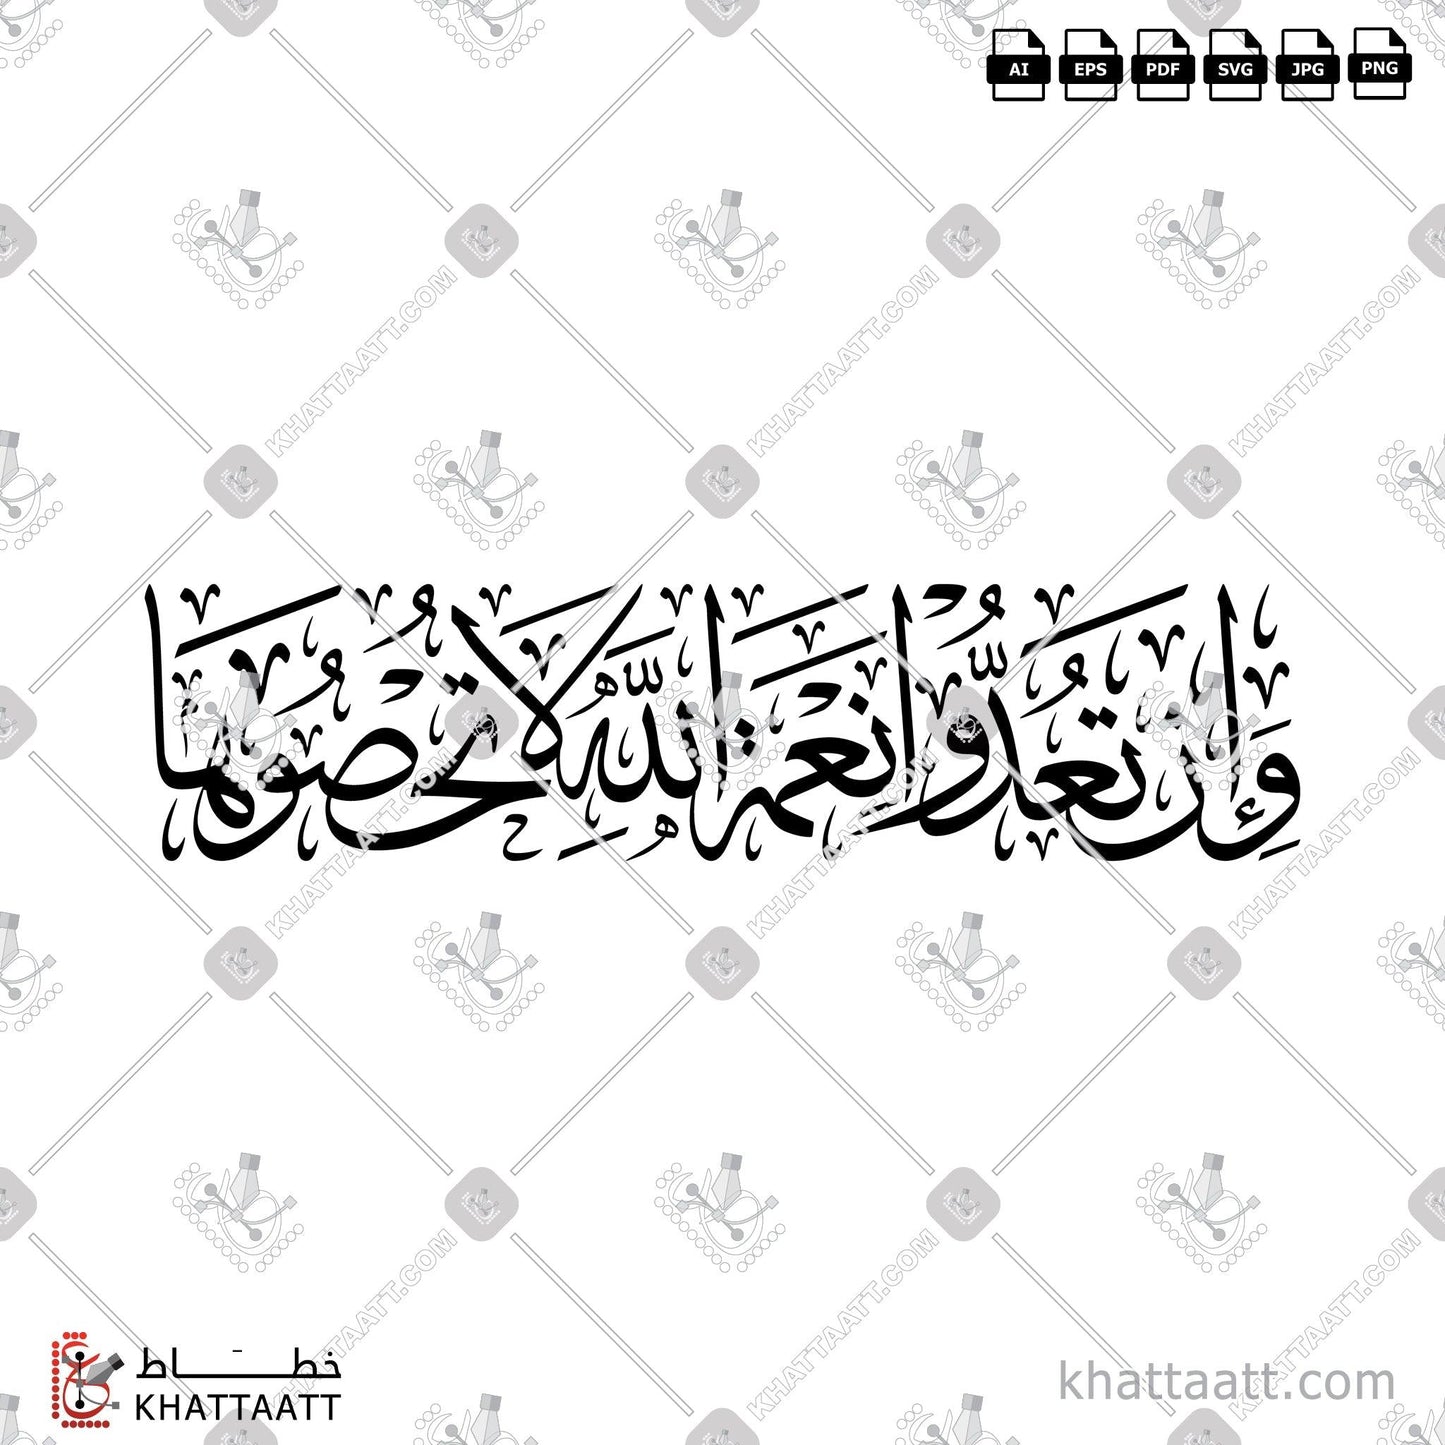 Download Arabic Calligraphy of وان تعدوا نعمة الله لا تحصوها in Thuluth - خط الثلث in vector and .png